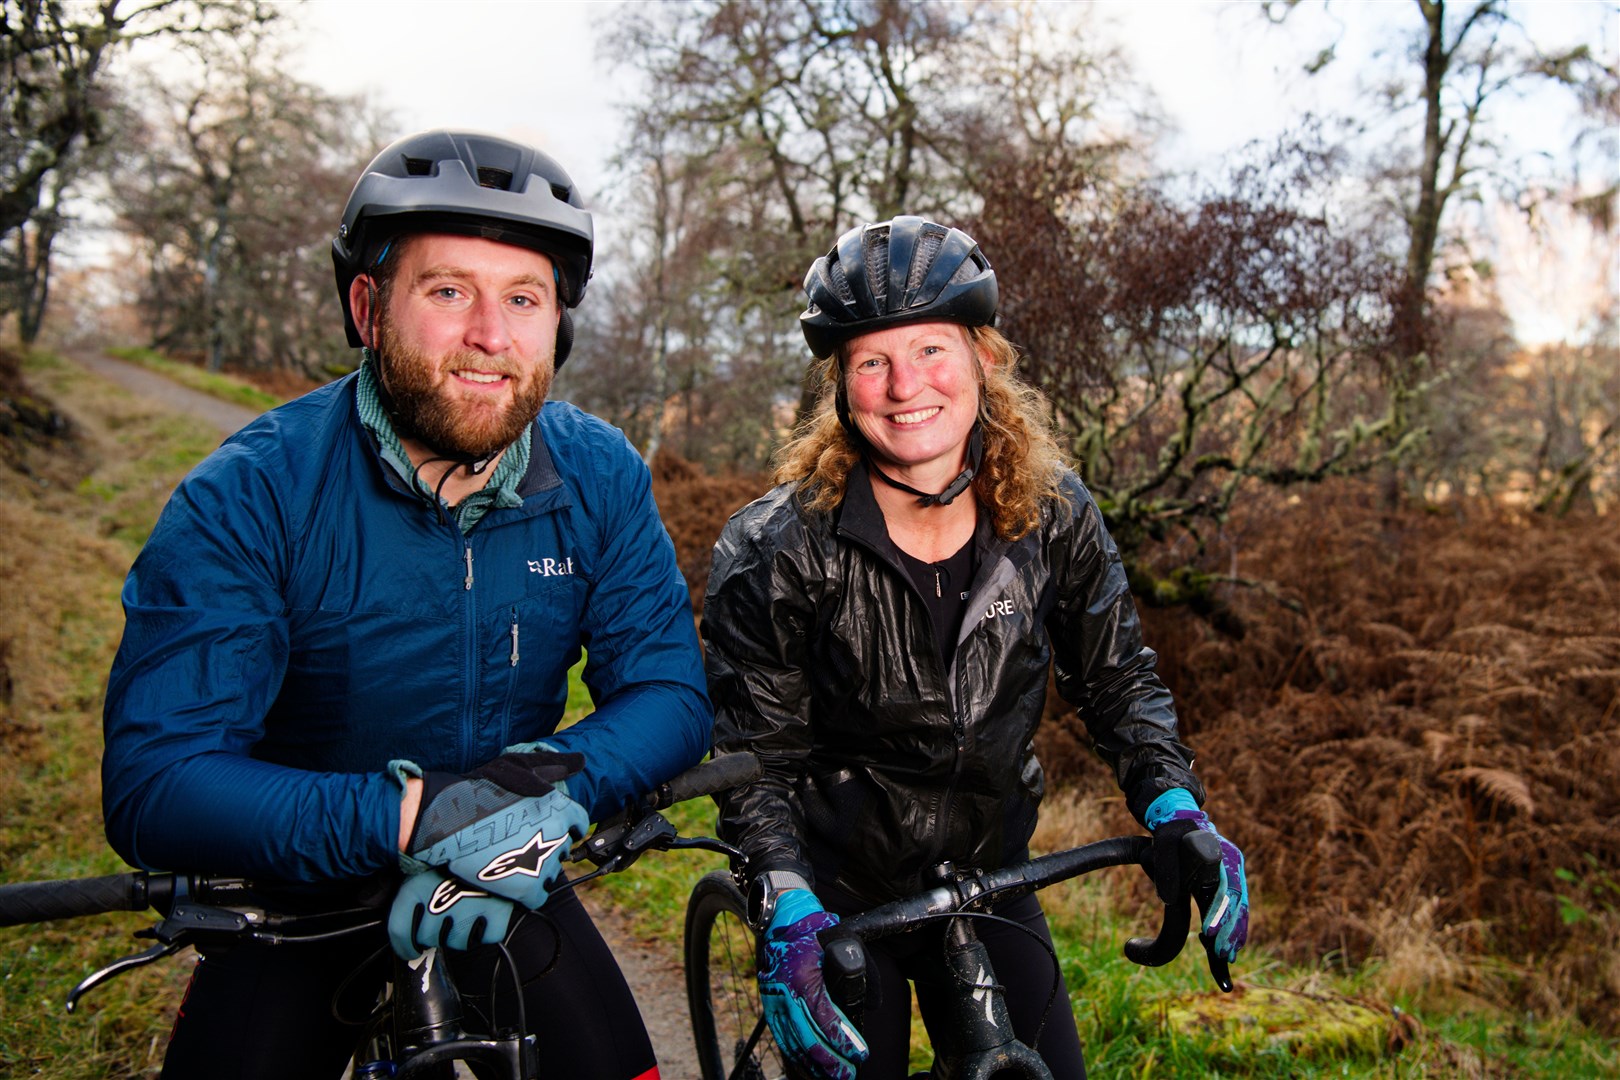 New Adventure Show presenters Calum Maclean and Marie Meldrum get on their bikes in the first episode of the new series.